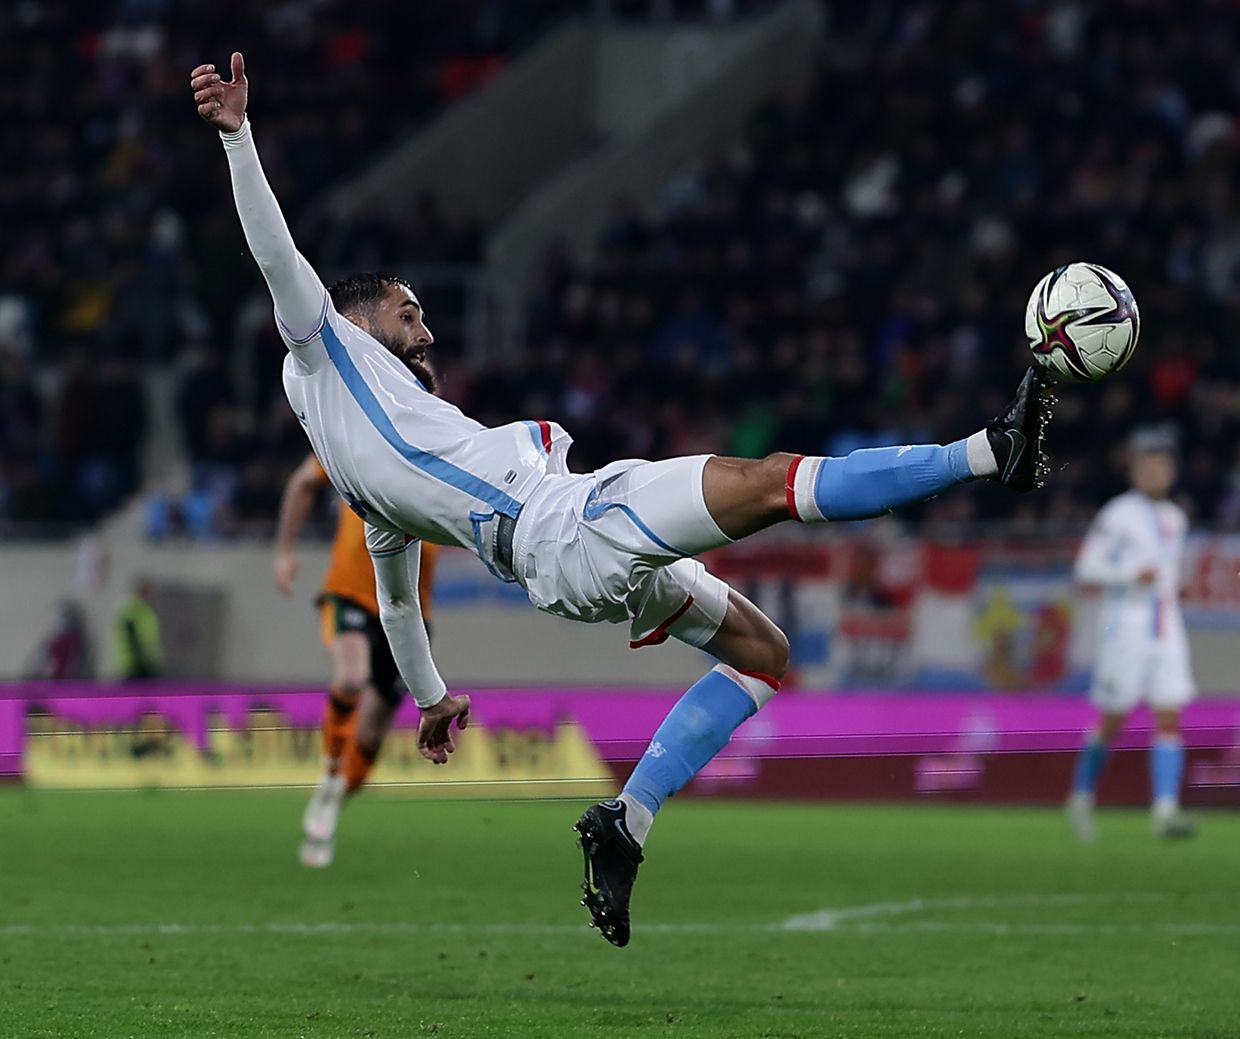 What feels like an overhead kick is actually Wahid Selimovich who went over the ball.